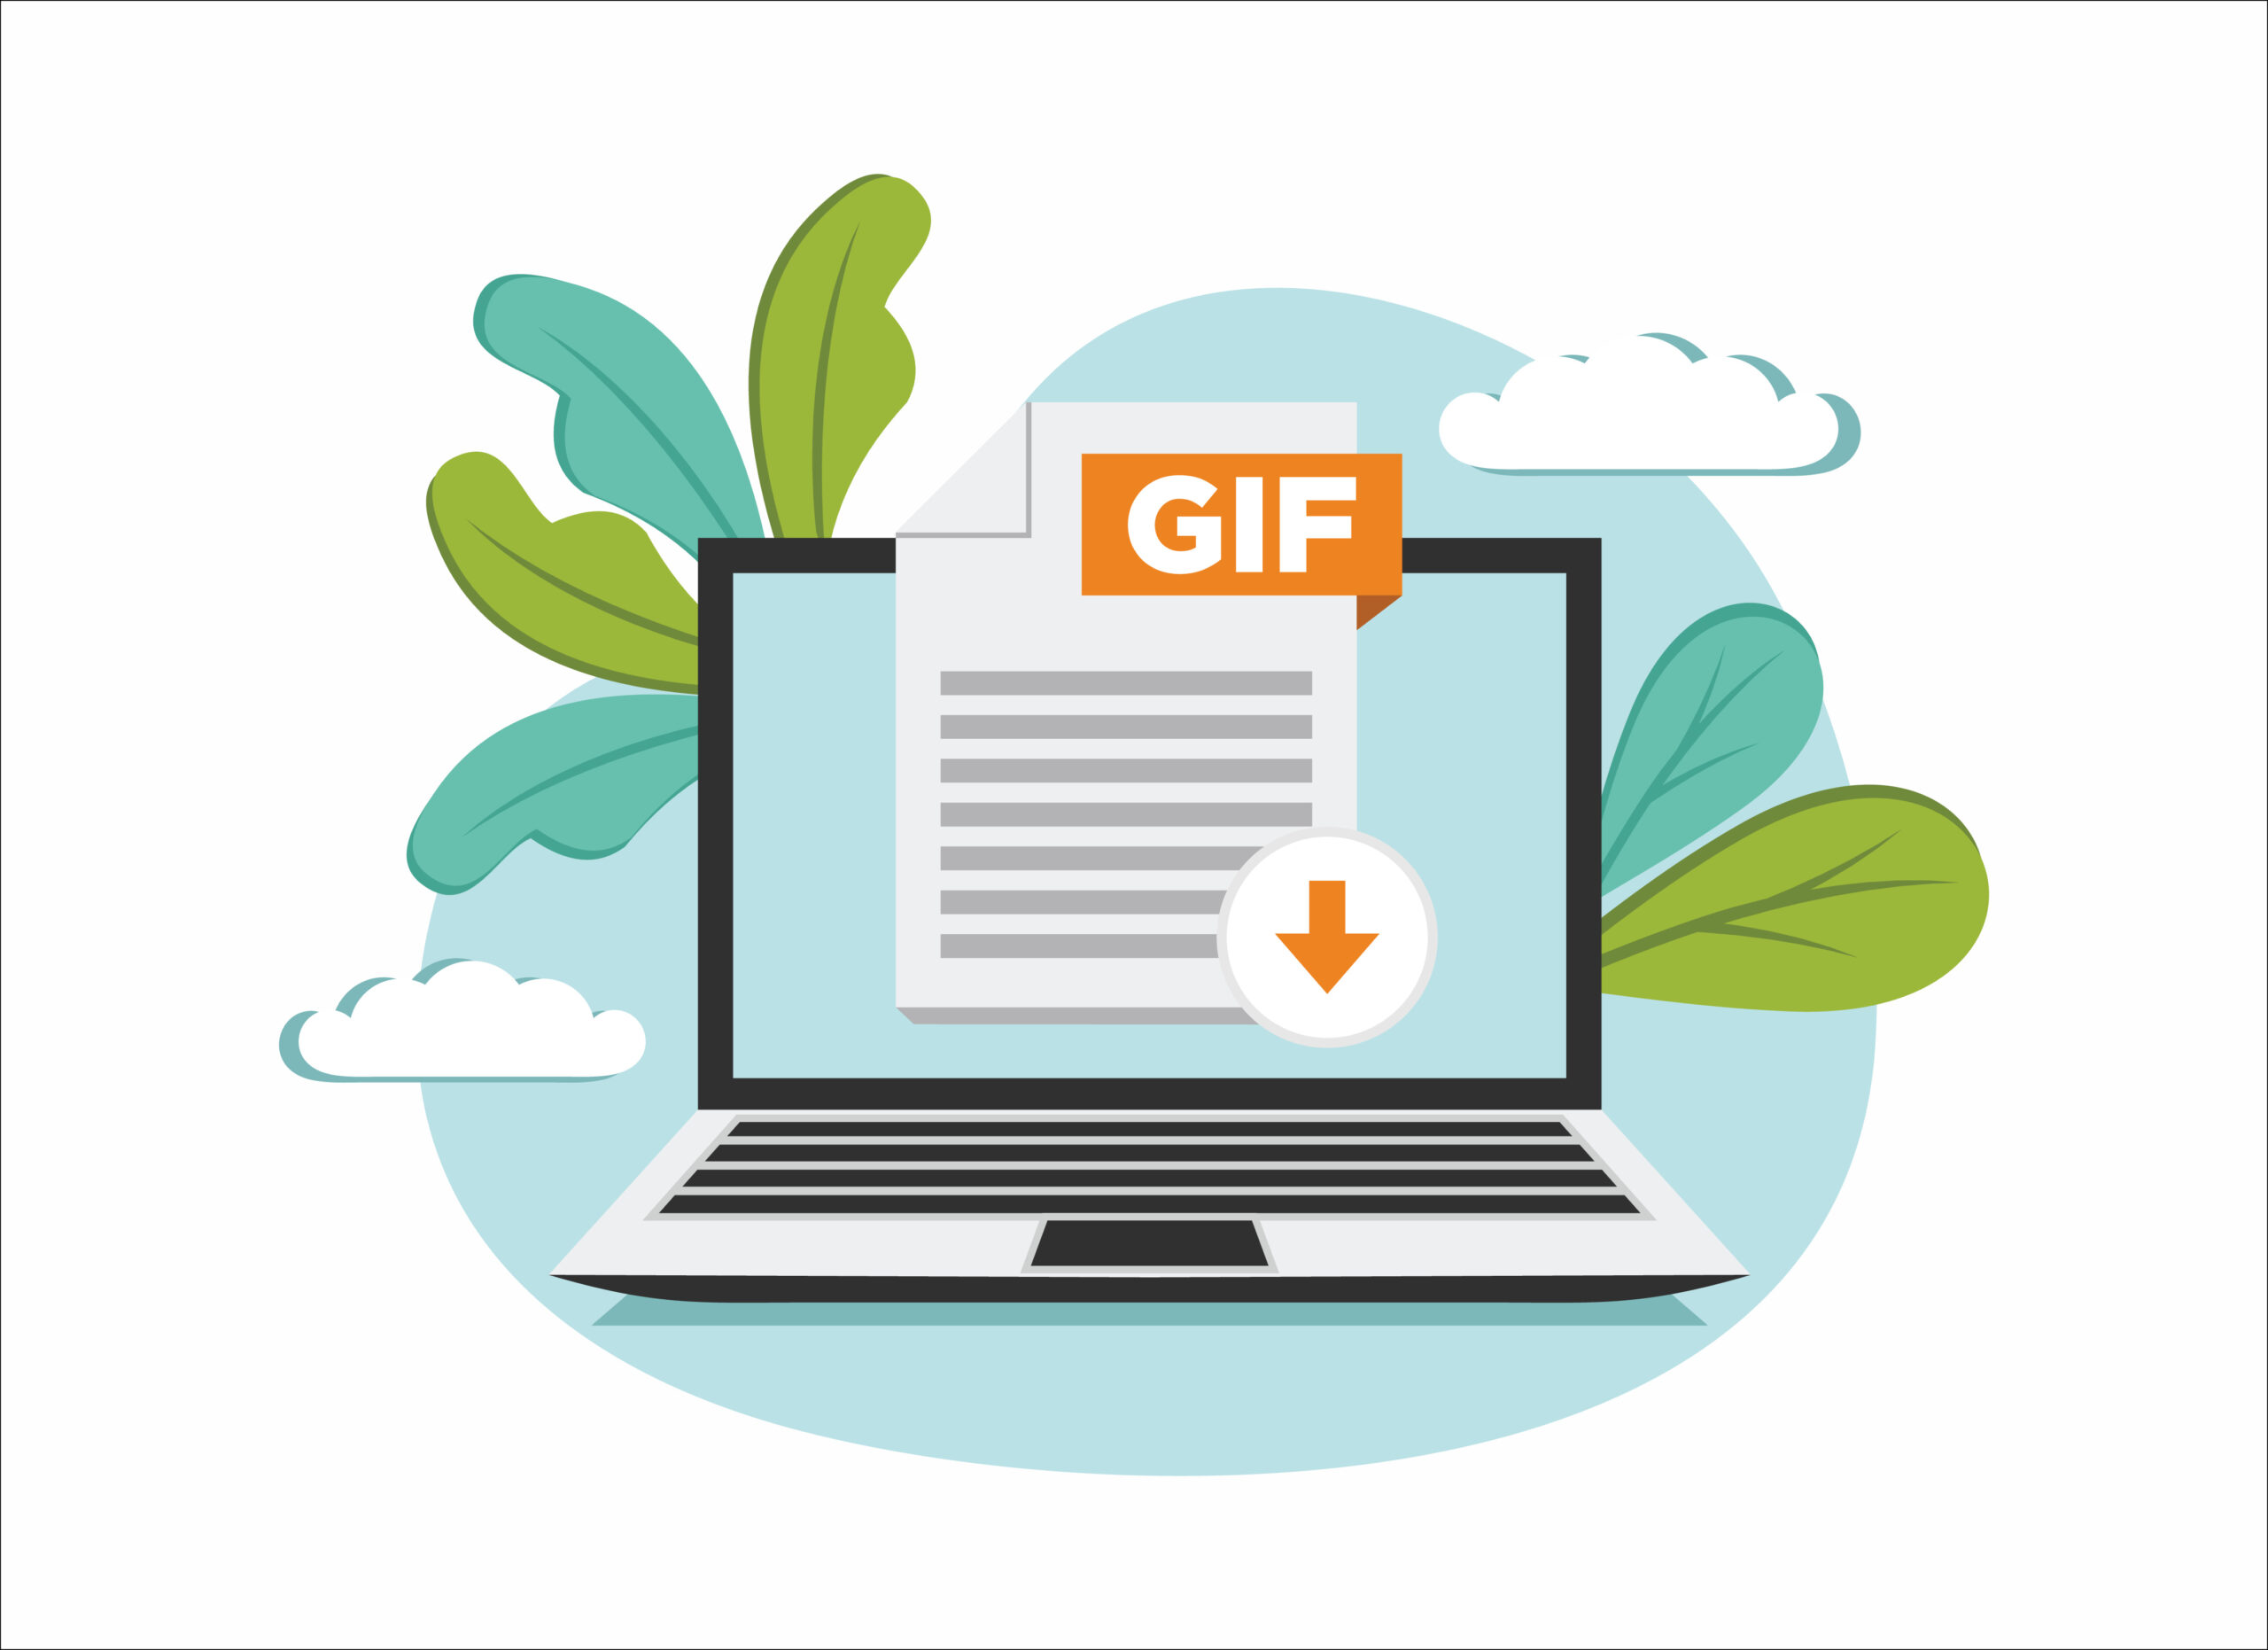 How to Save a GIF to Your Computer